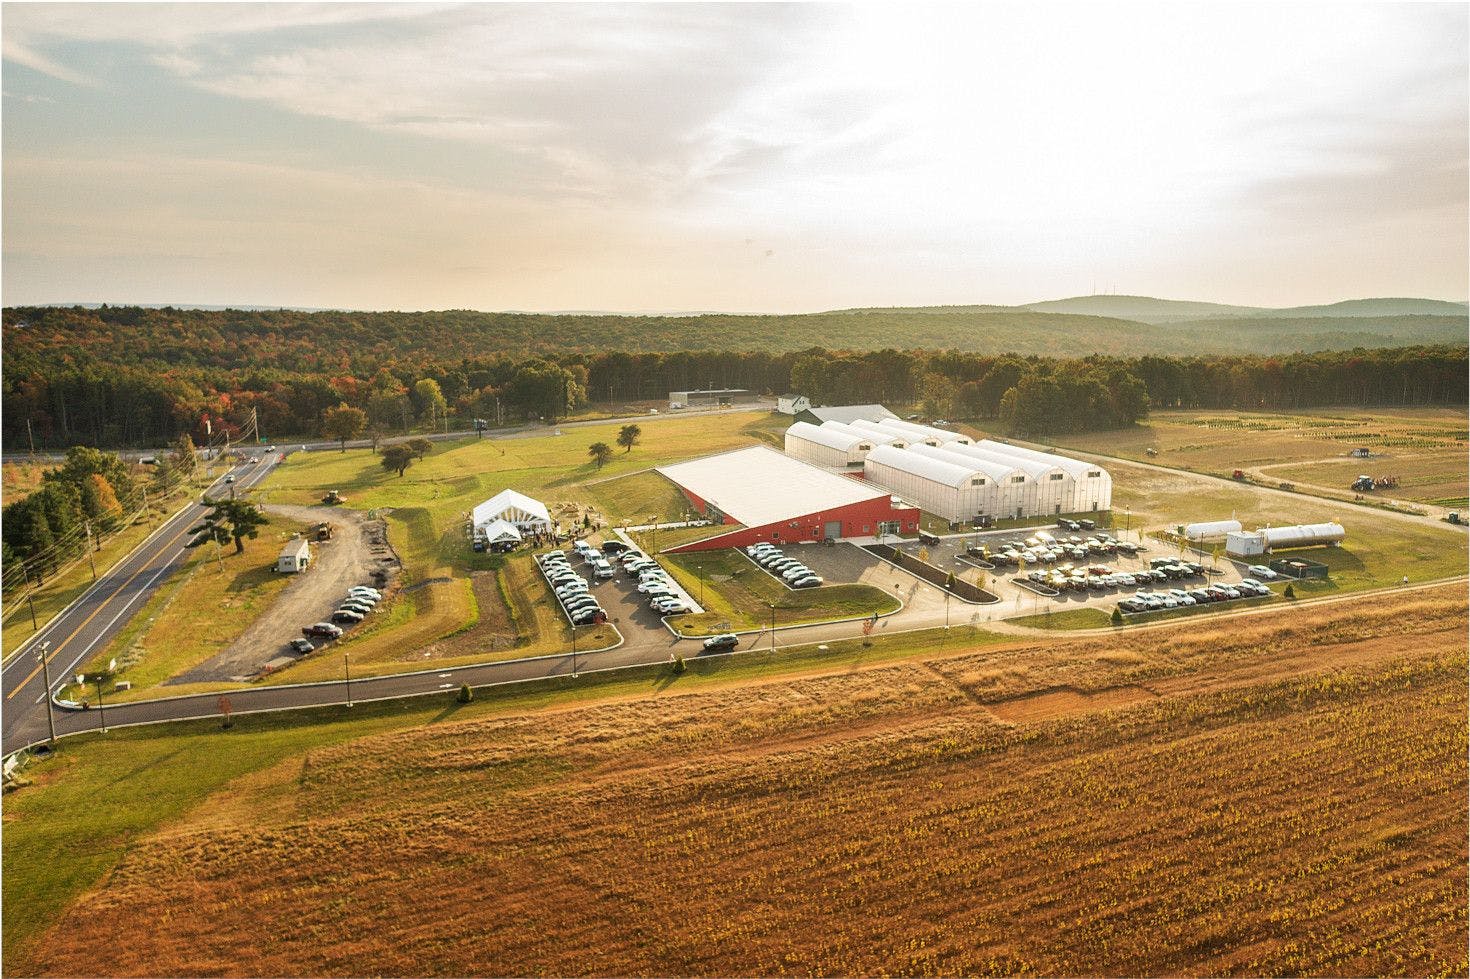 Photo from Pocono Organics. The Pocono Organics agricultural, processing, market, and cafe facility spans more than 380 acres in the Pocono Mountains.